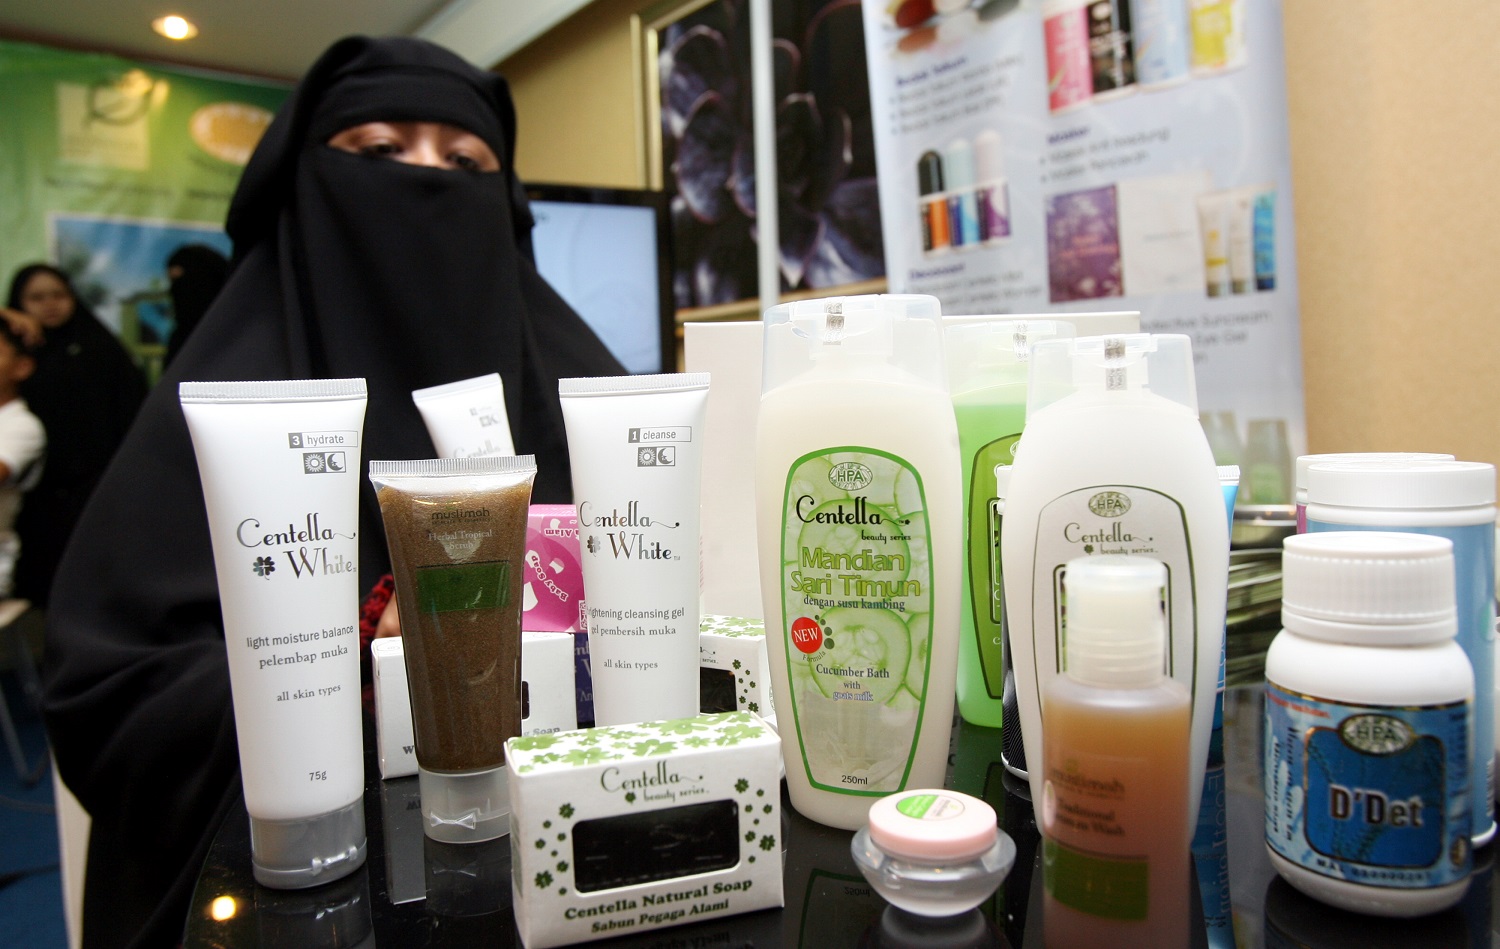 A display of halal-certified cosmetics andf beauty products at a Malaysia trade show in 2010 (AFP)